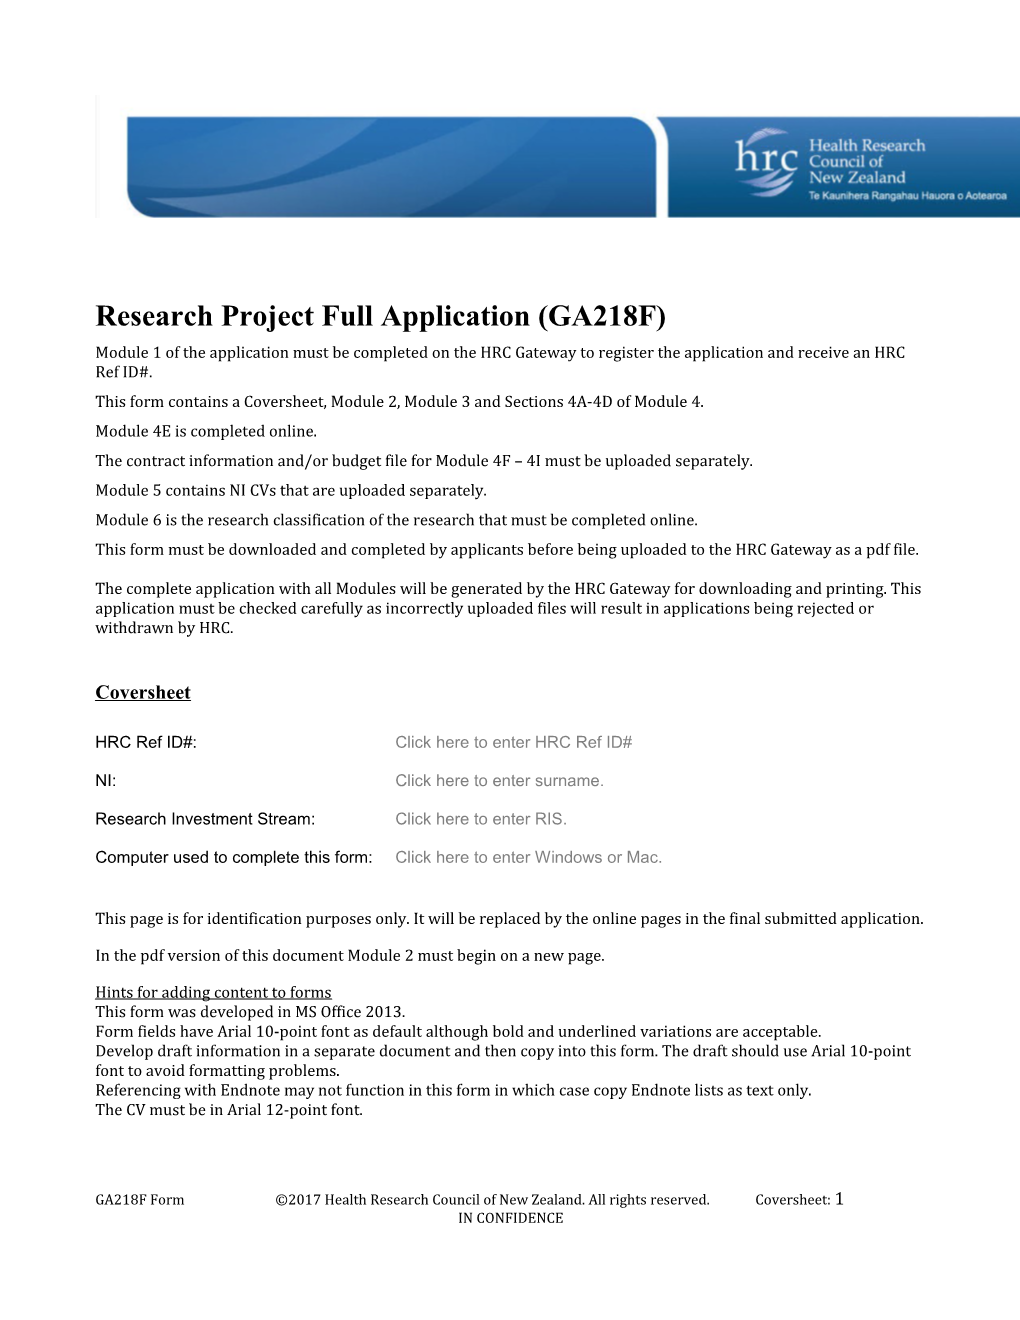 Research Project Full Application (GA218F)